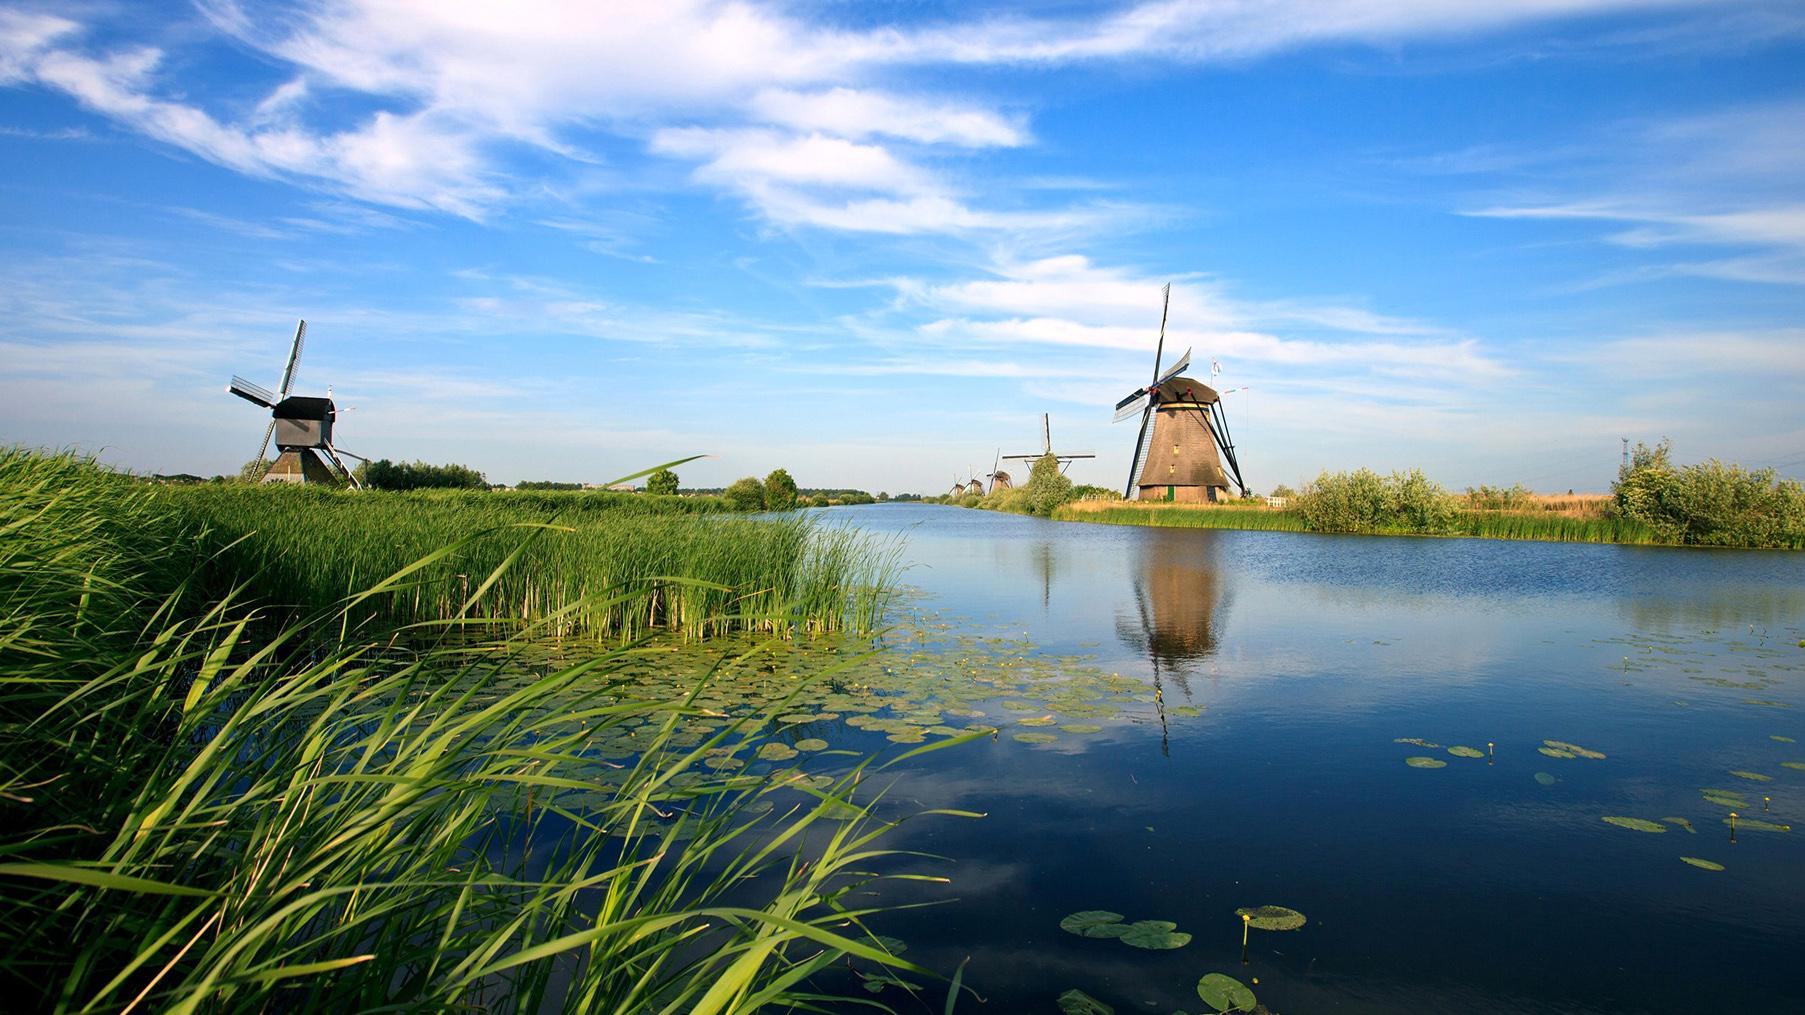 Holland, Mill, River, Cool Nature Wallpaper, Amazing Landscape